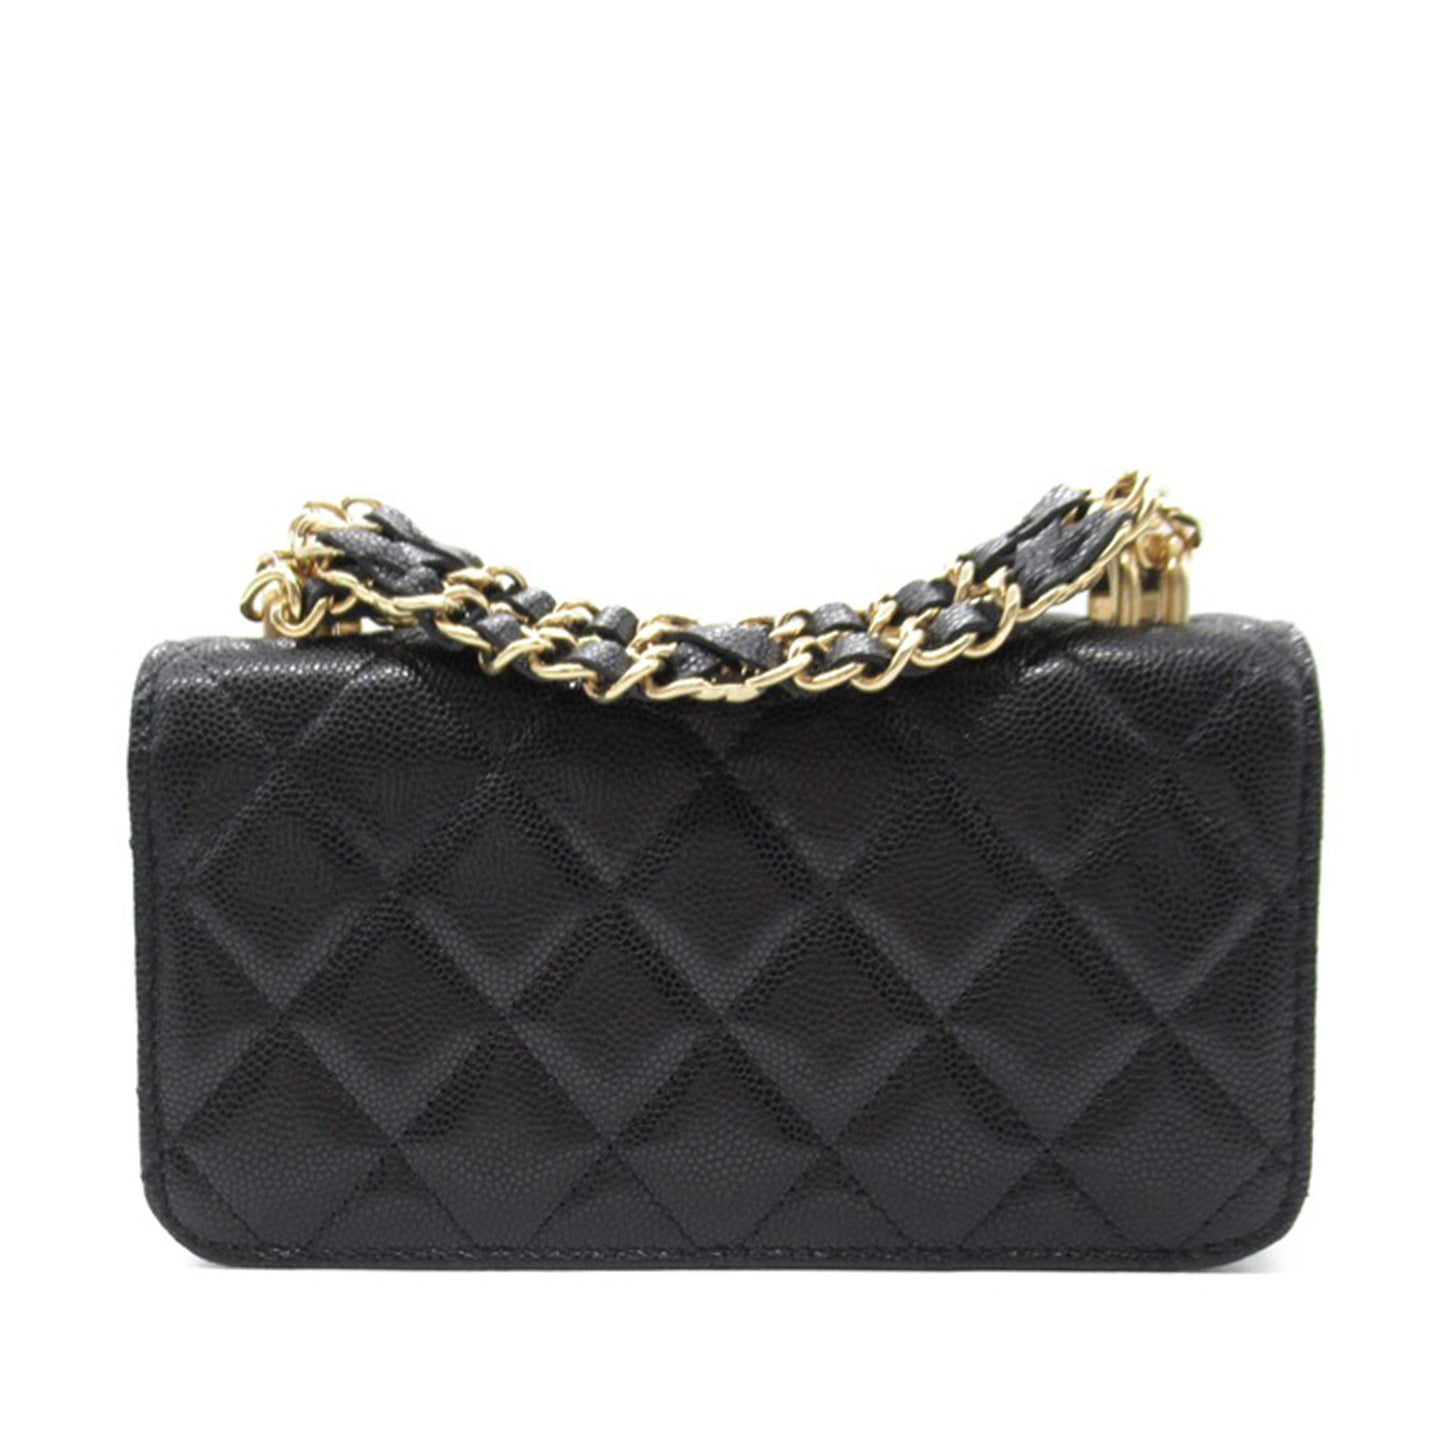 Caviar Coco First Flap Phone Holder with Chain Black - Gaby Paris